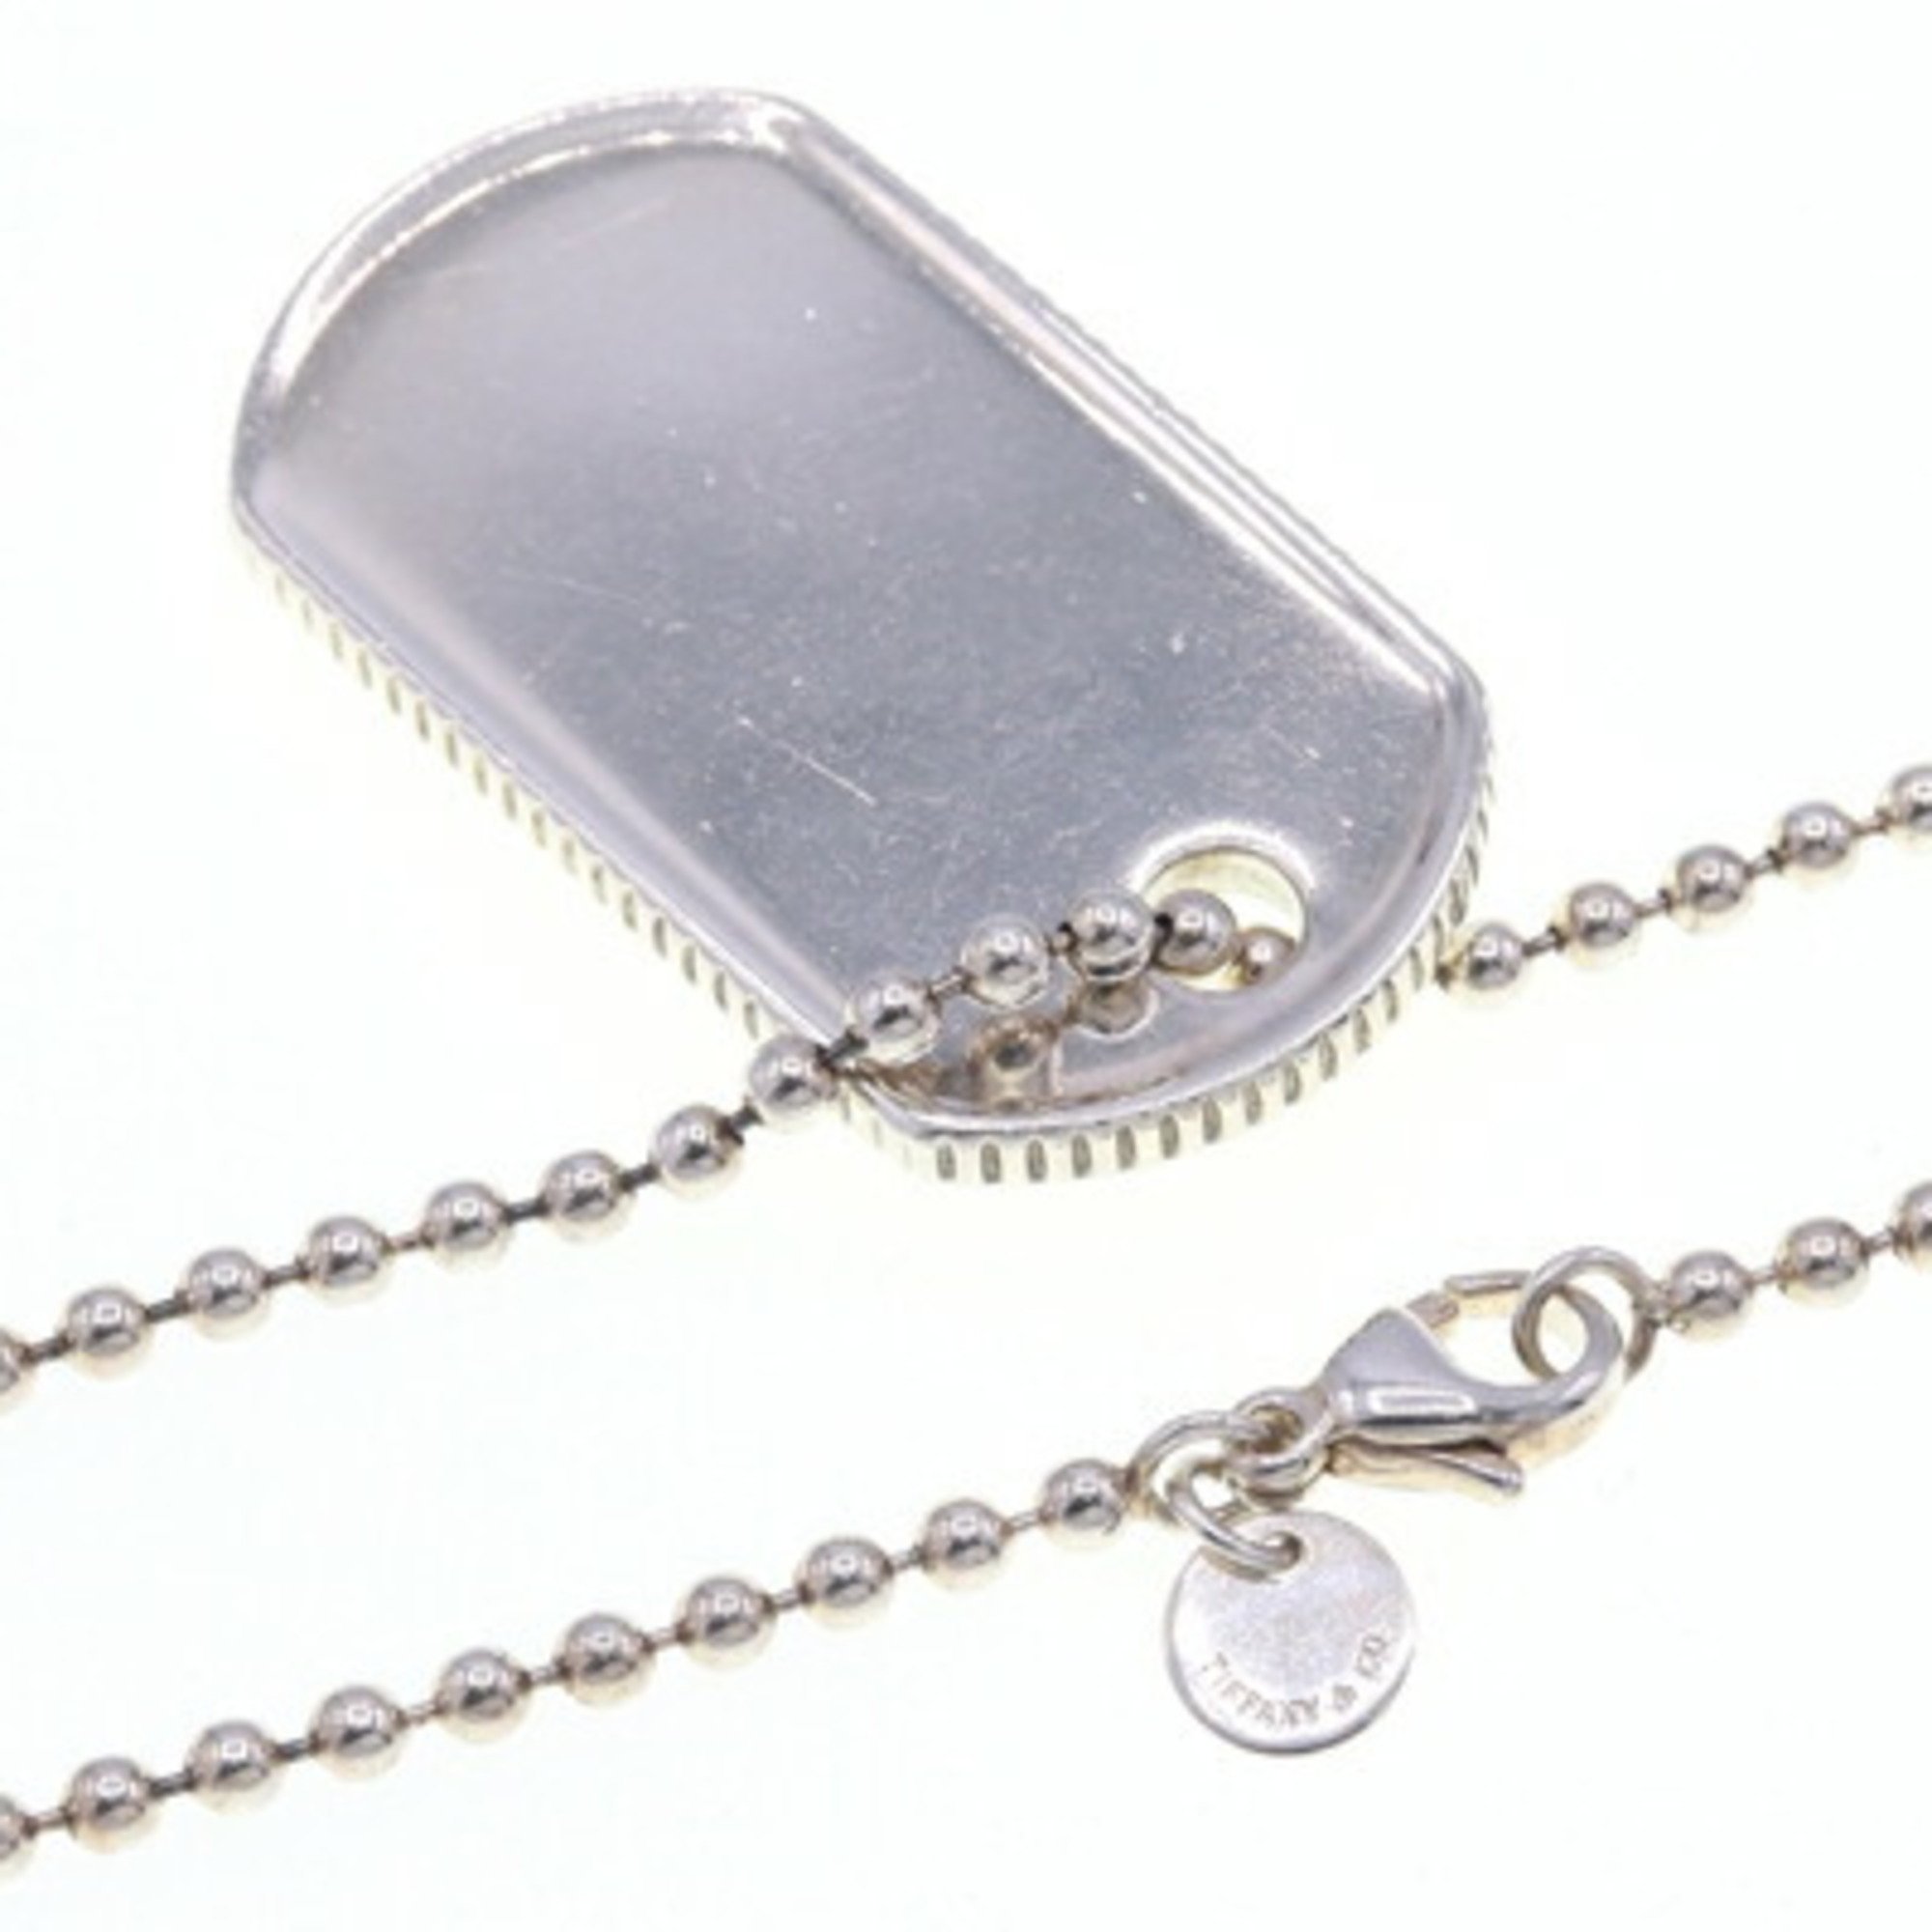 Tiffany Necklace Coin Edge Dog Tag SV Sterling Silver 925 Pendant Ball Chain ID Long TIFFANY & Co.